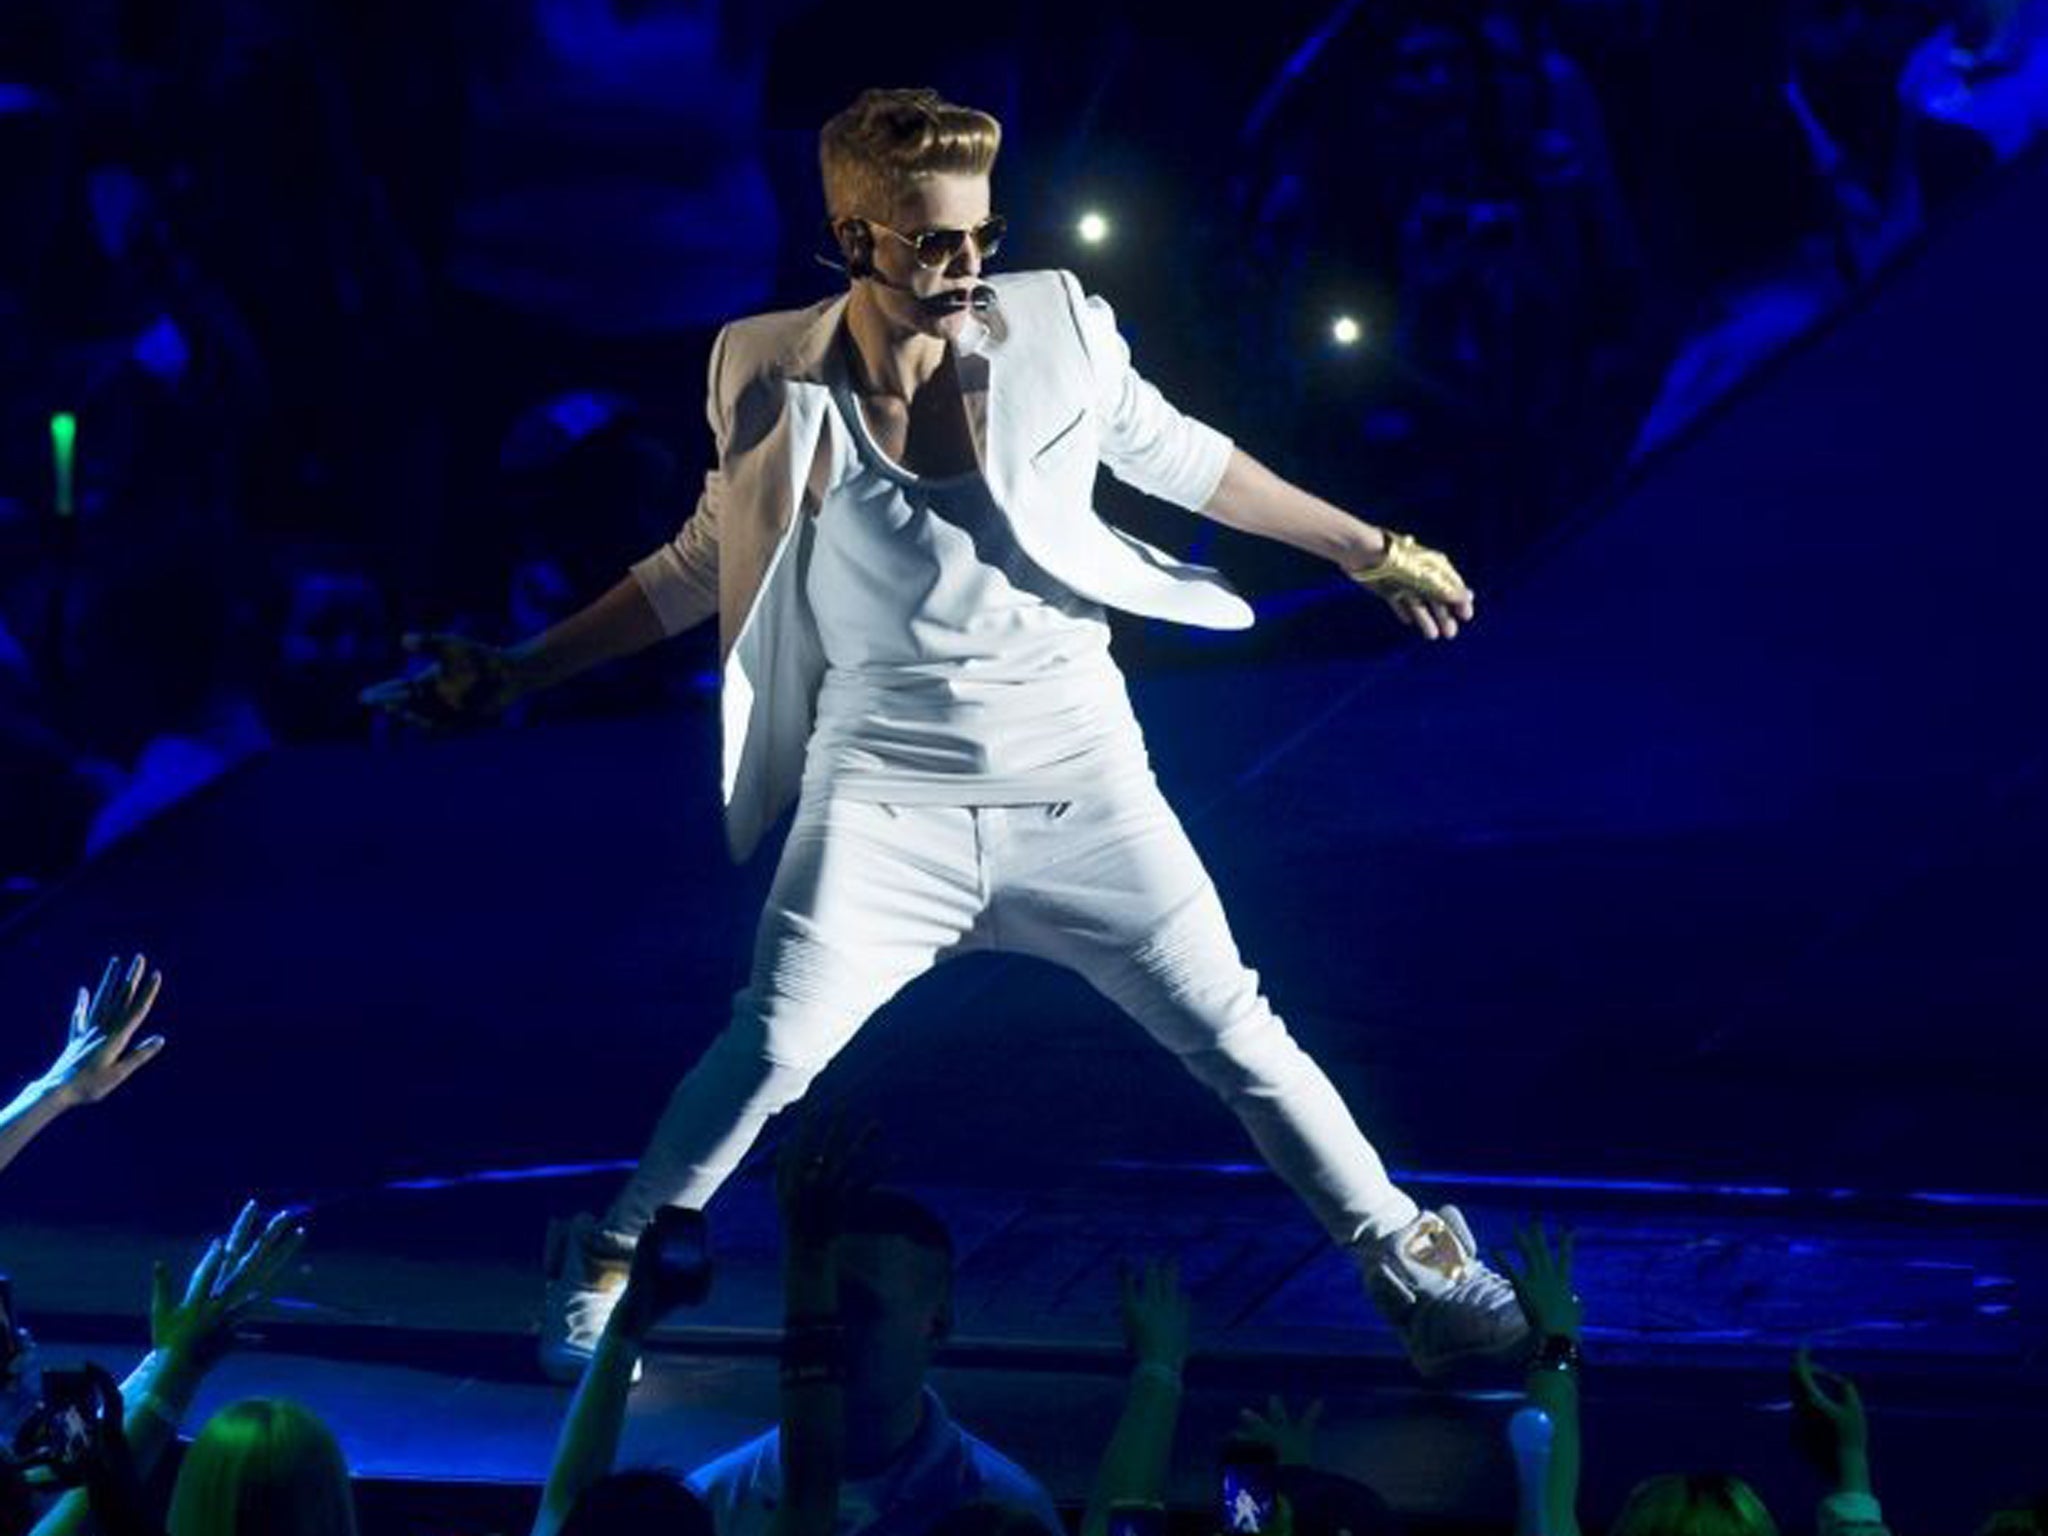 Just Bieber performs at the 02 in London after arriving on stage two hours later than scheduled